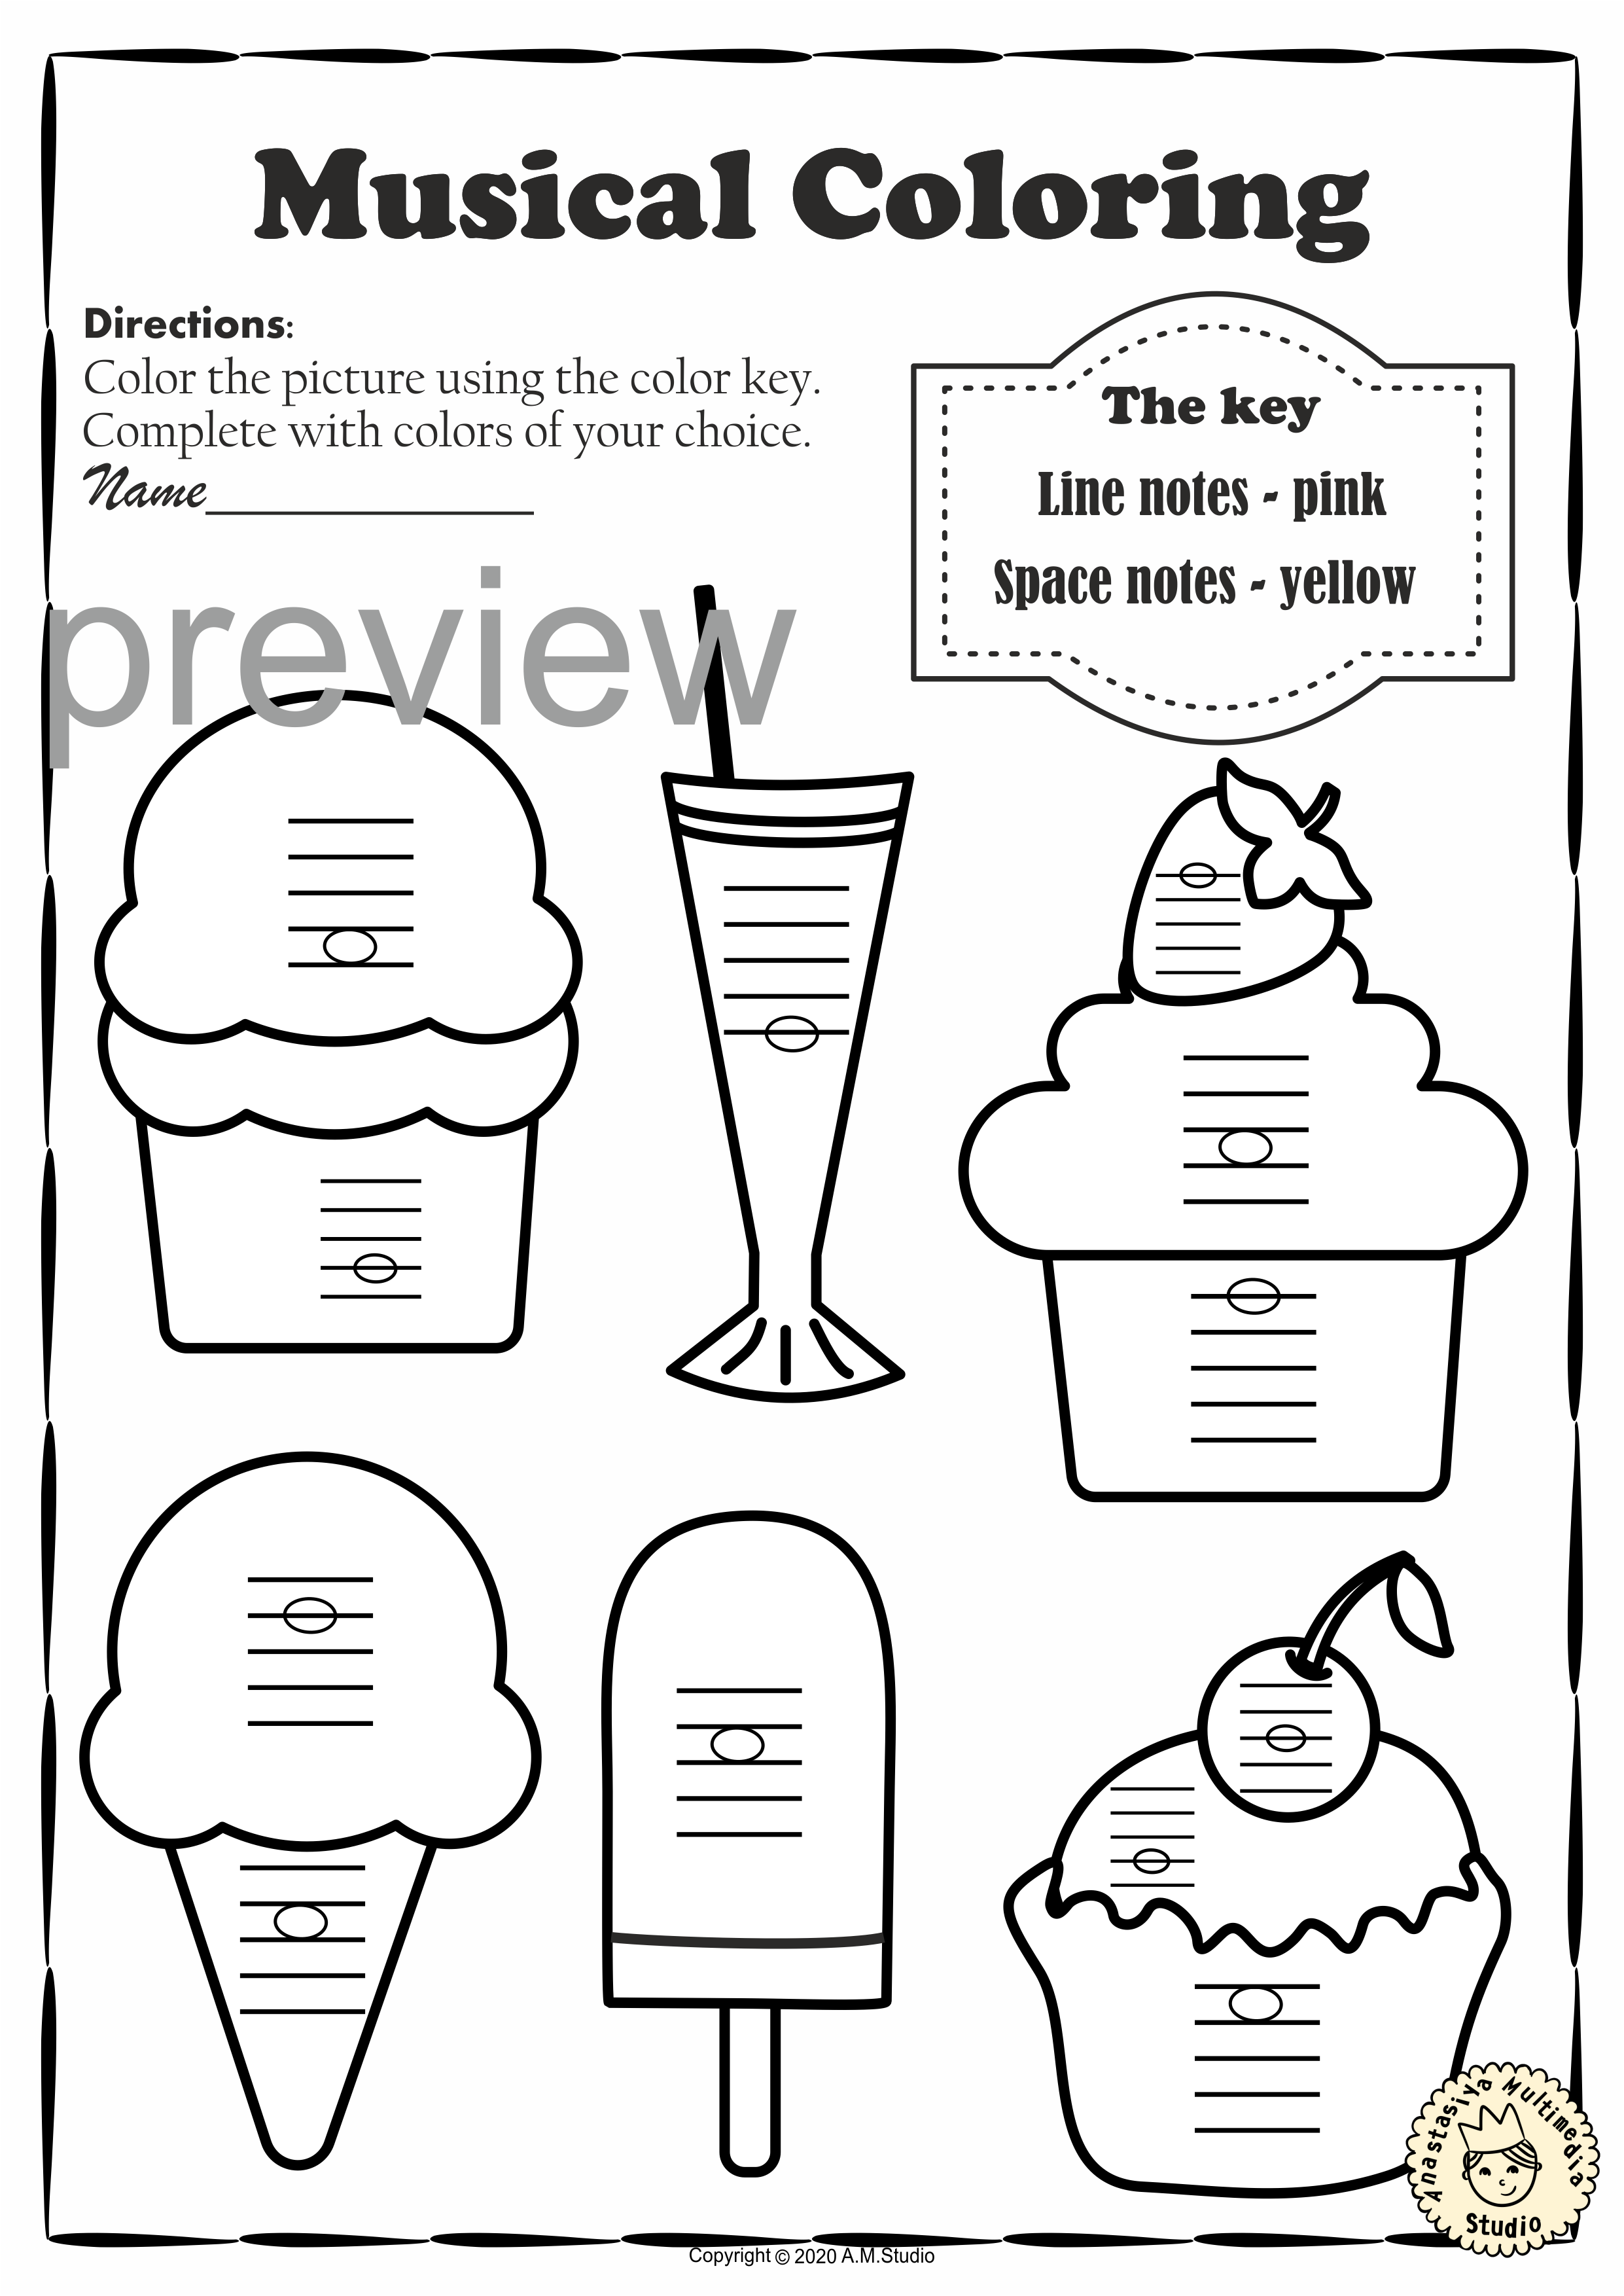 Summer Music Coloring Pages | Lines and Spaces Coloring Worksheets (img # 1)